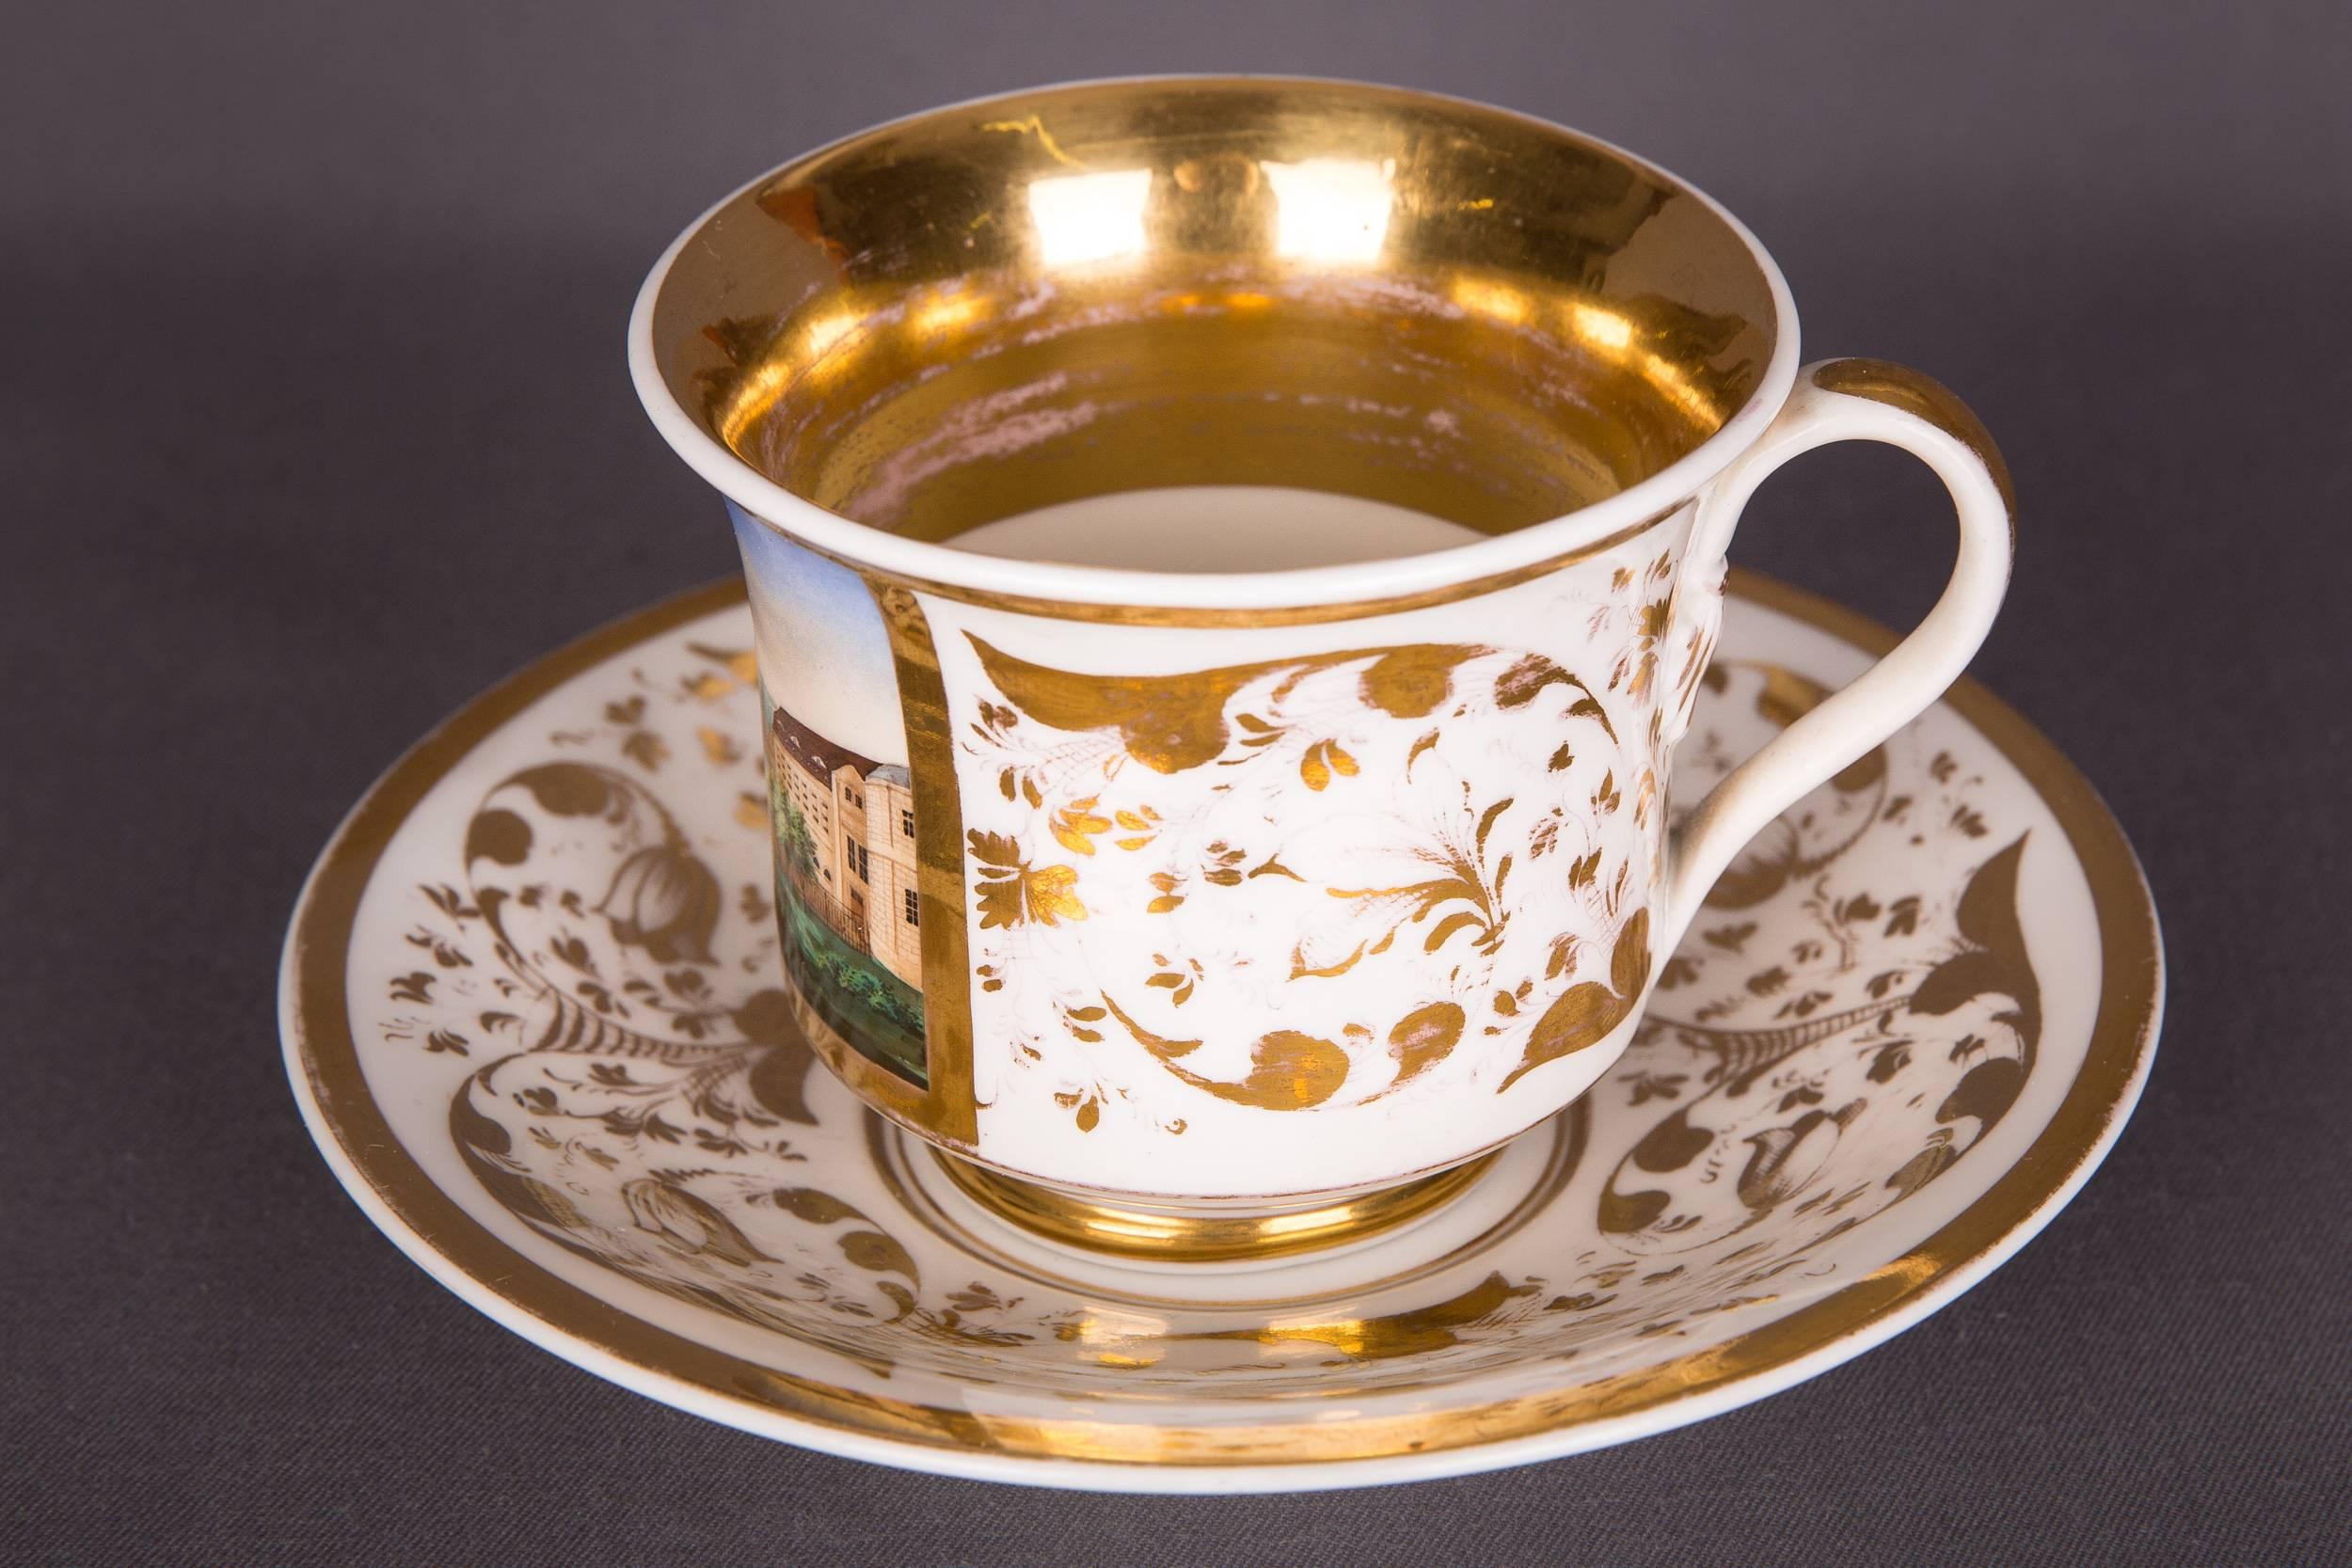 Very elaborate and finely painted.

Very fine finish.

KPM Berlin 1st choice

Dimensions:
Cup (height: 7.5 cm diameter: 9 cm)
Saucer (height: 3 cm diameter: 15 cm).